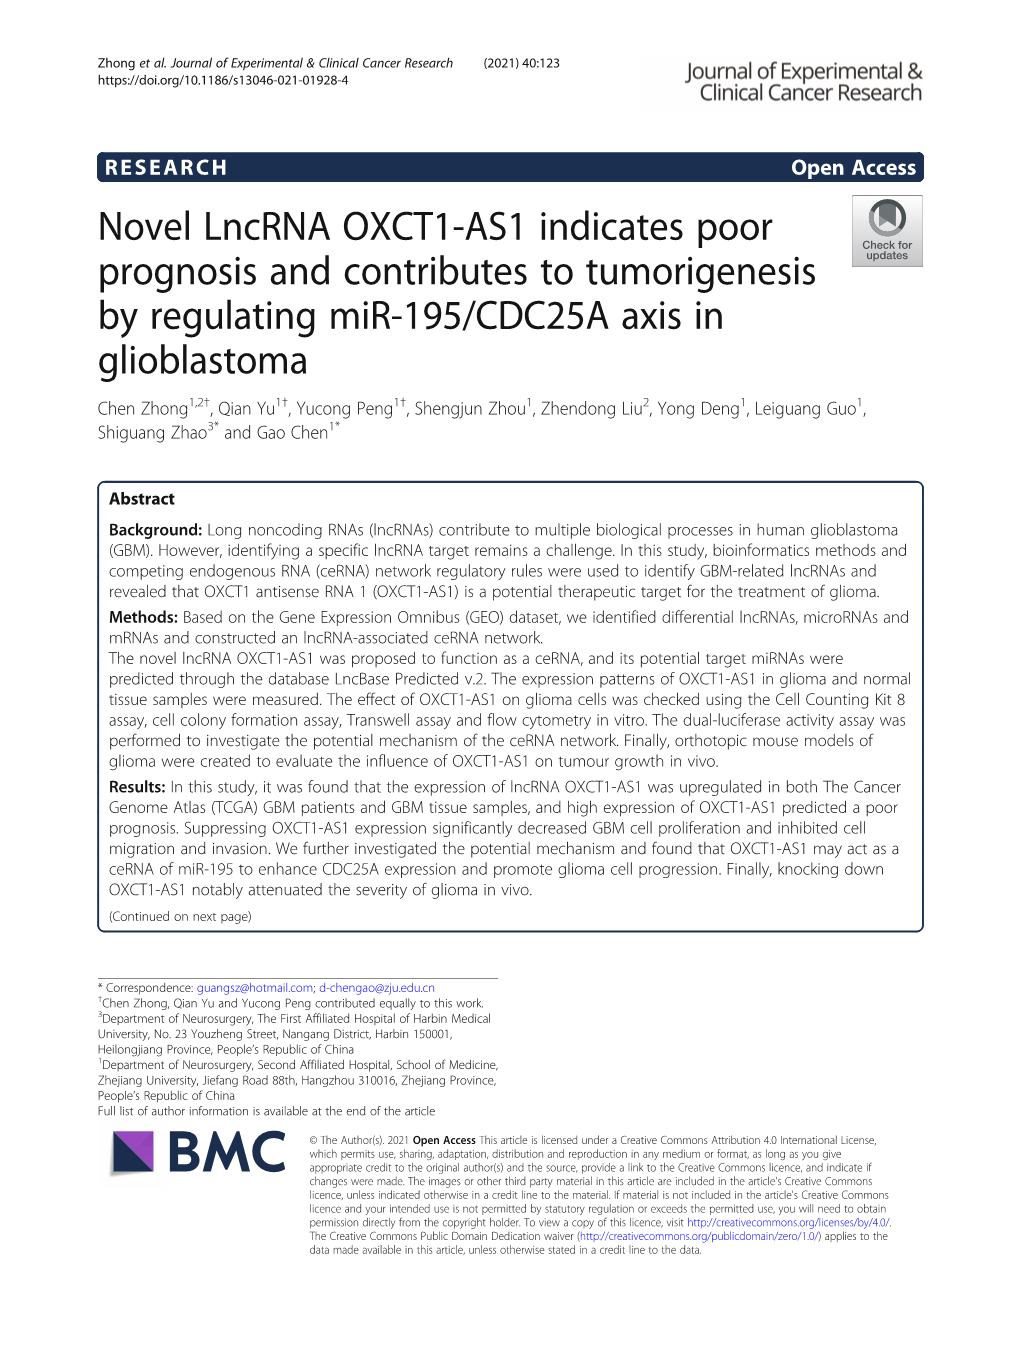 Novel Lncrna OXCT1-AS1 Indicates Poor Prognosis and Contributes To